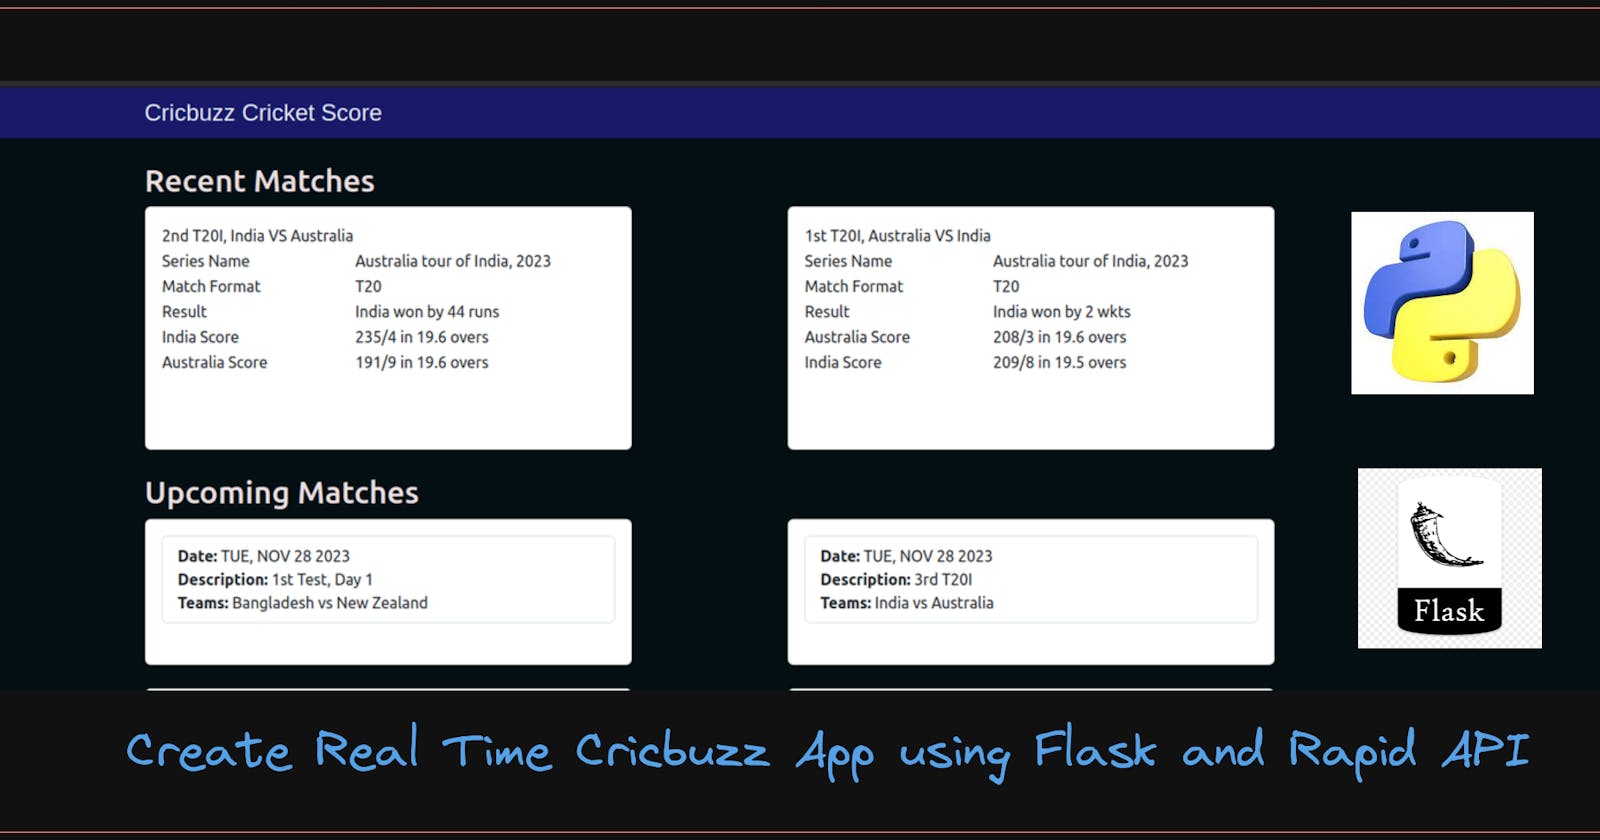 Create a Real-Time Cricbuzz Application using Flask and RapidAPI